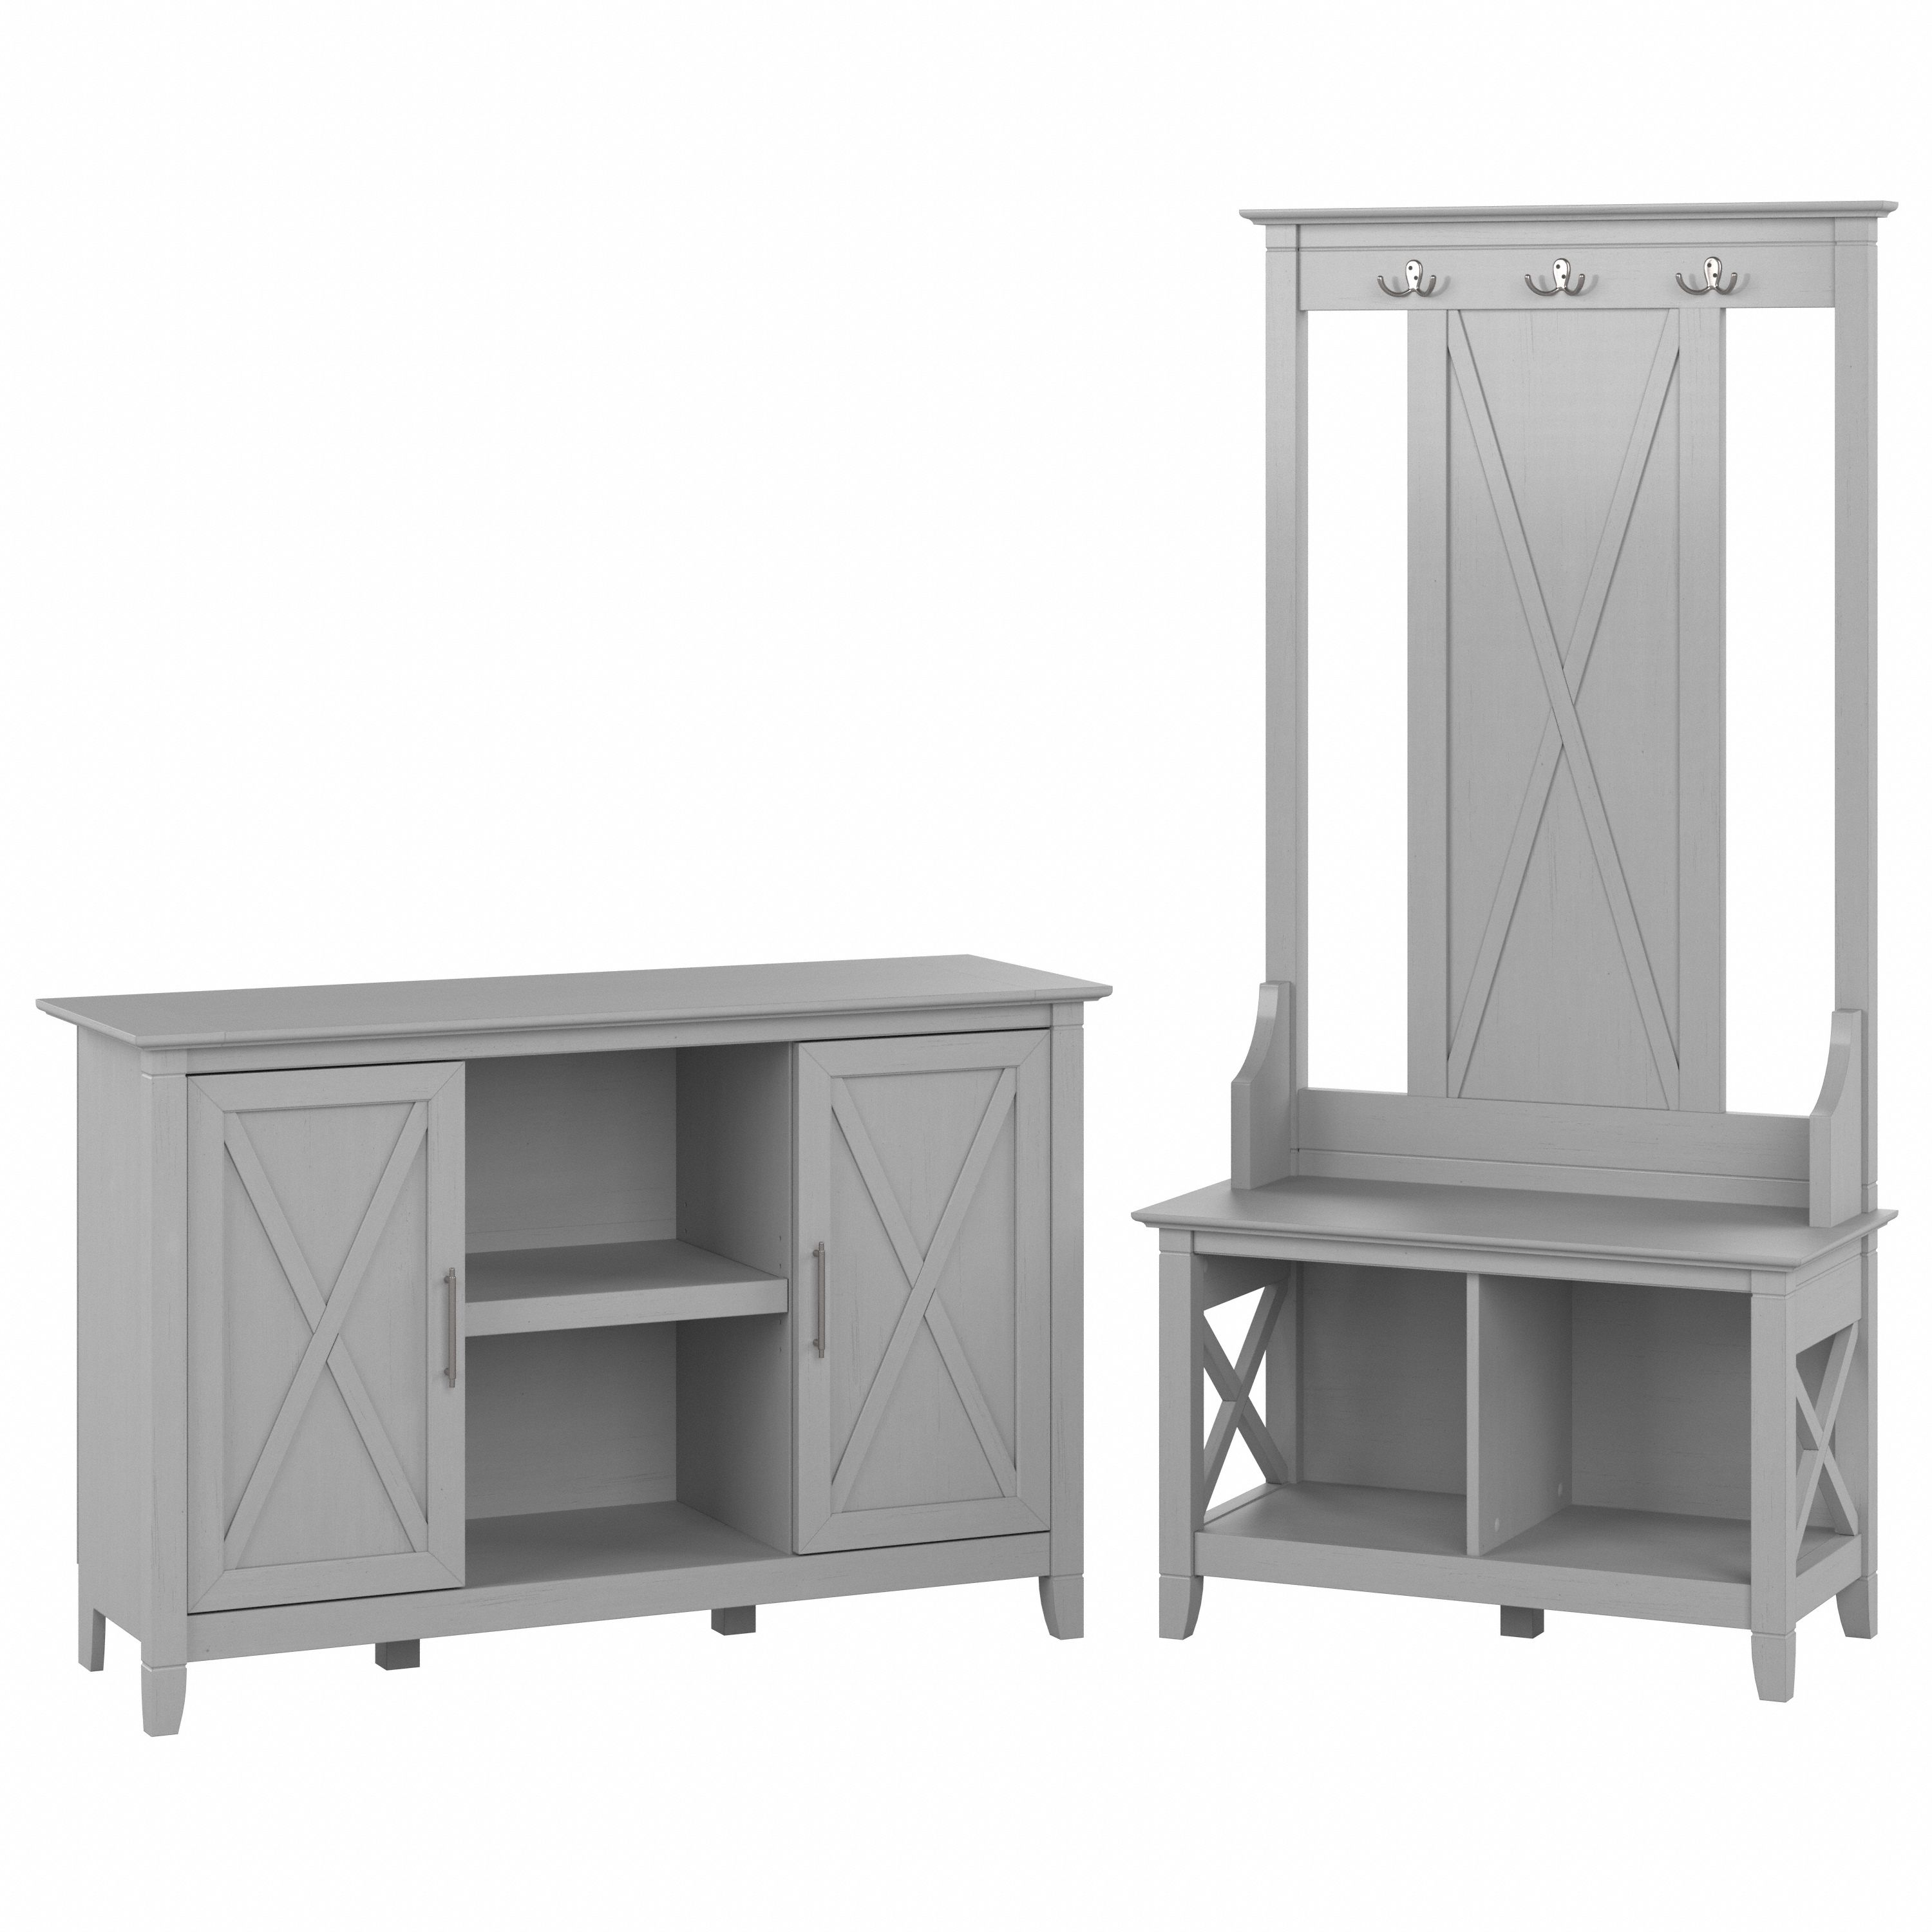 Shop Bush Furniture Key West Entryway Storage Set with Hall Tree, Shoe Bench and 2 Door Cabinet 02 KWS054CG #color_cape cod gray